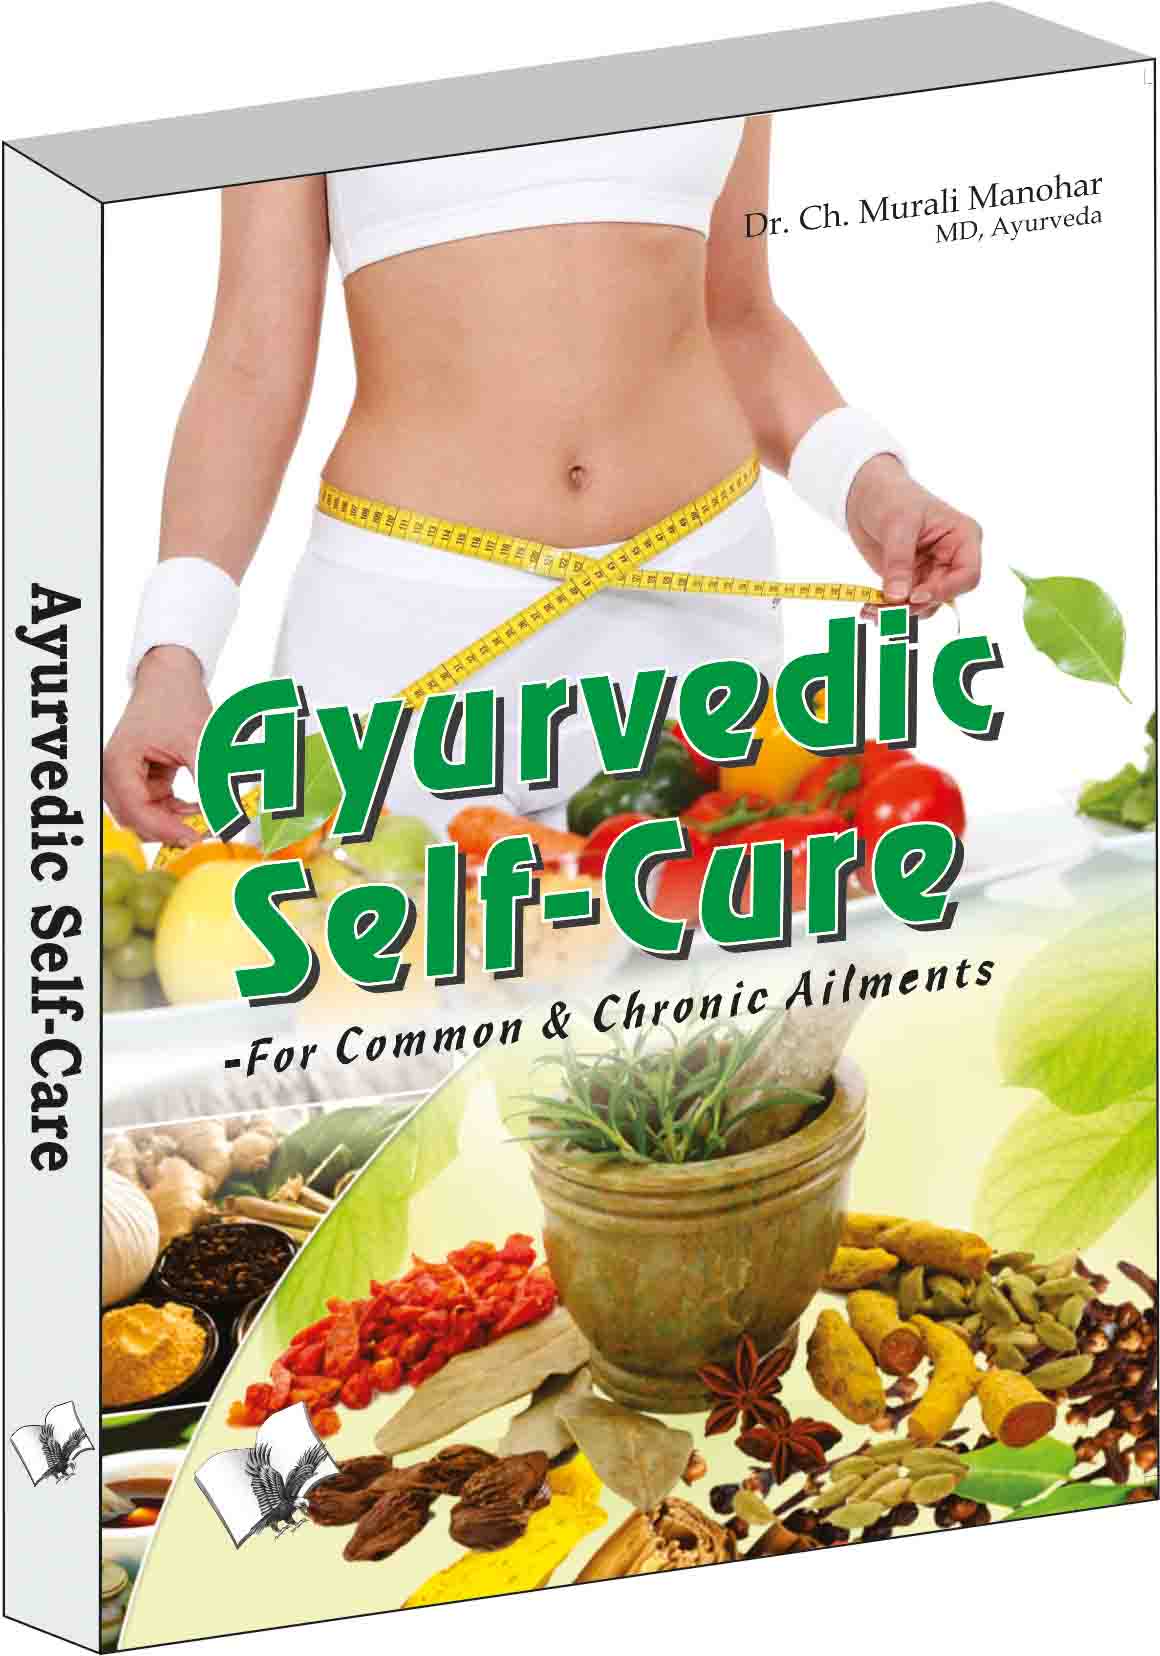 Ayurvedic Self Cure -For Common & Chronic Ailments